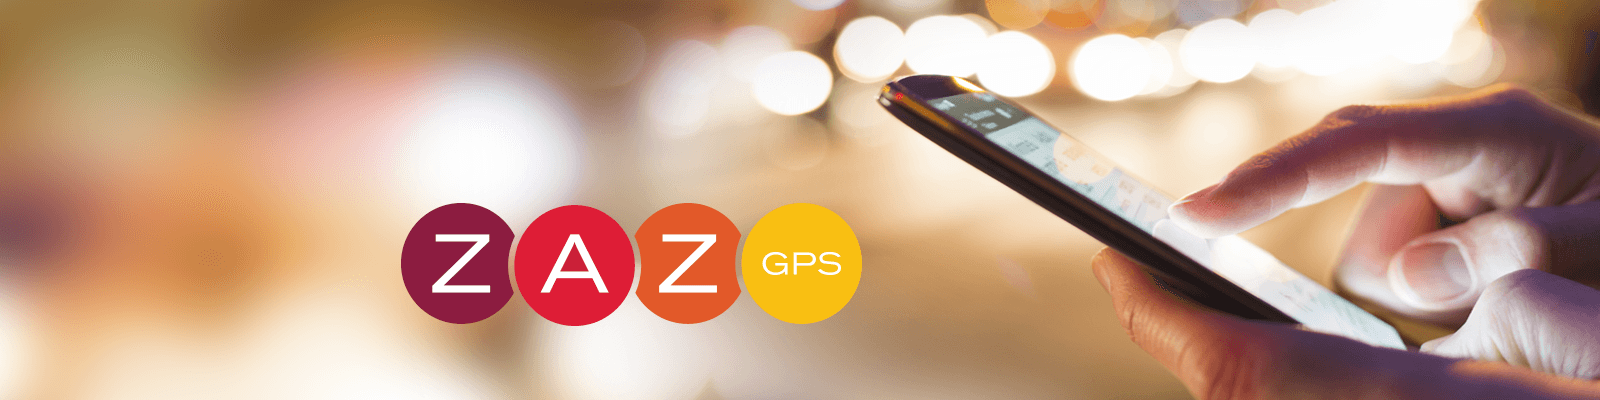 Stay Connected with Your Customers with ZAZ GPS - Consumer Tracking by Connected Dealer Services